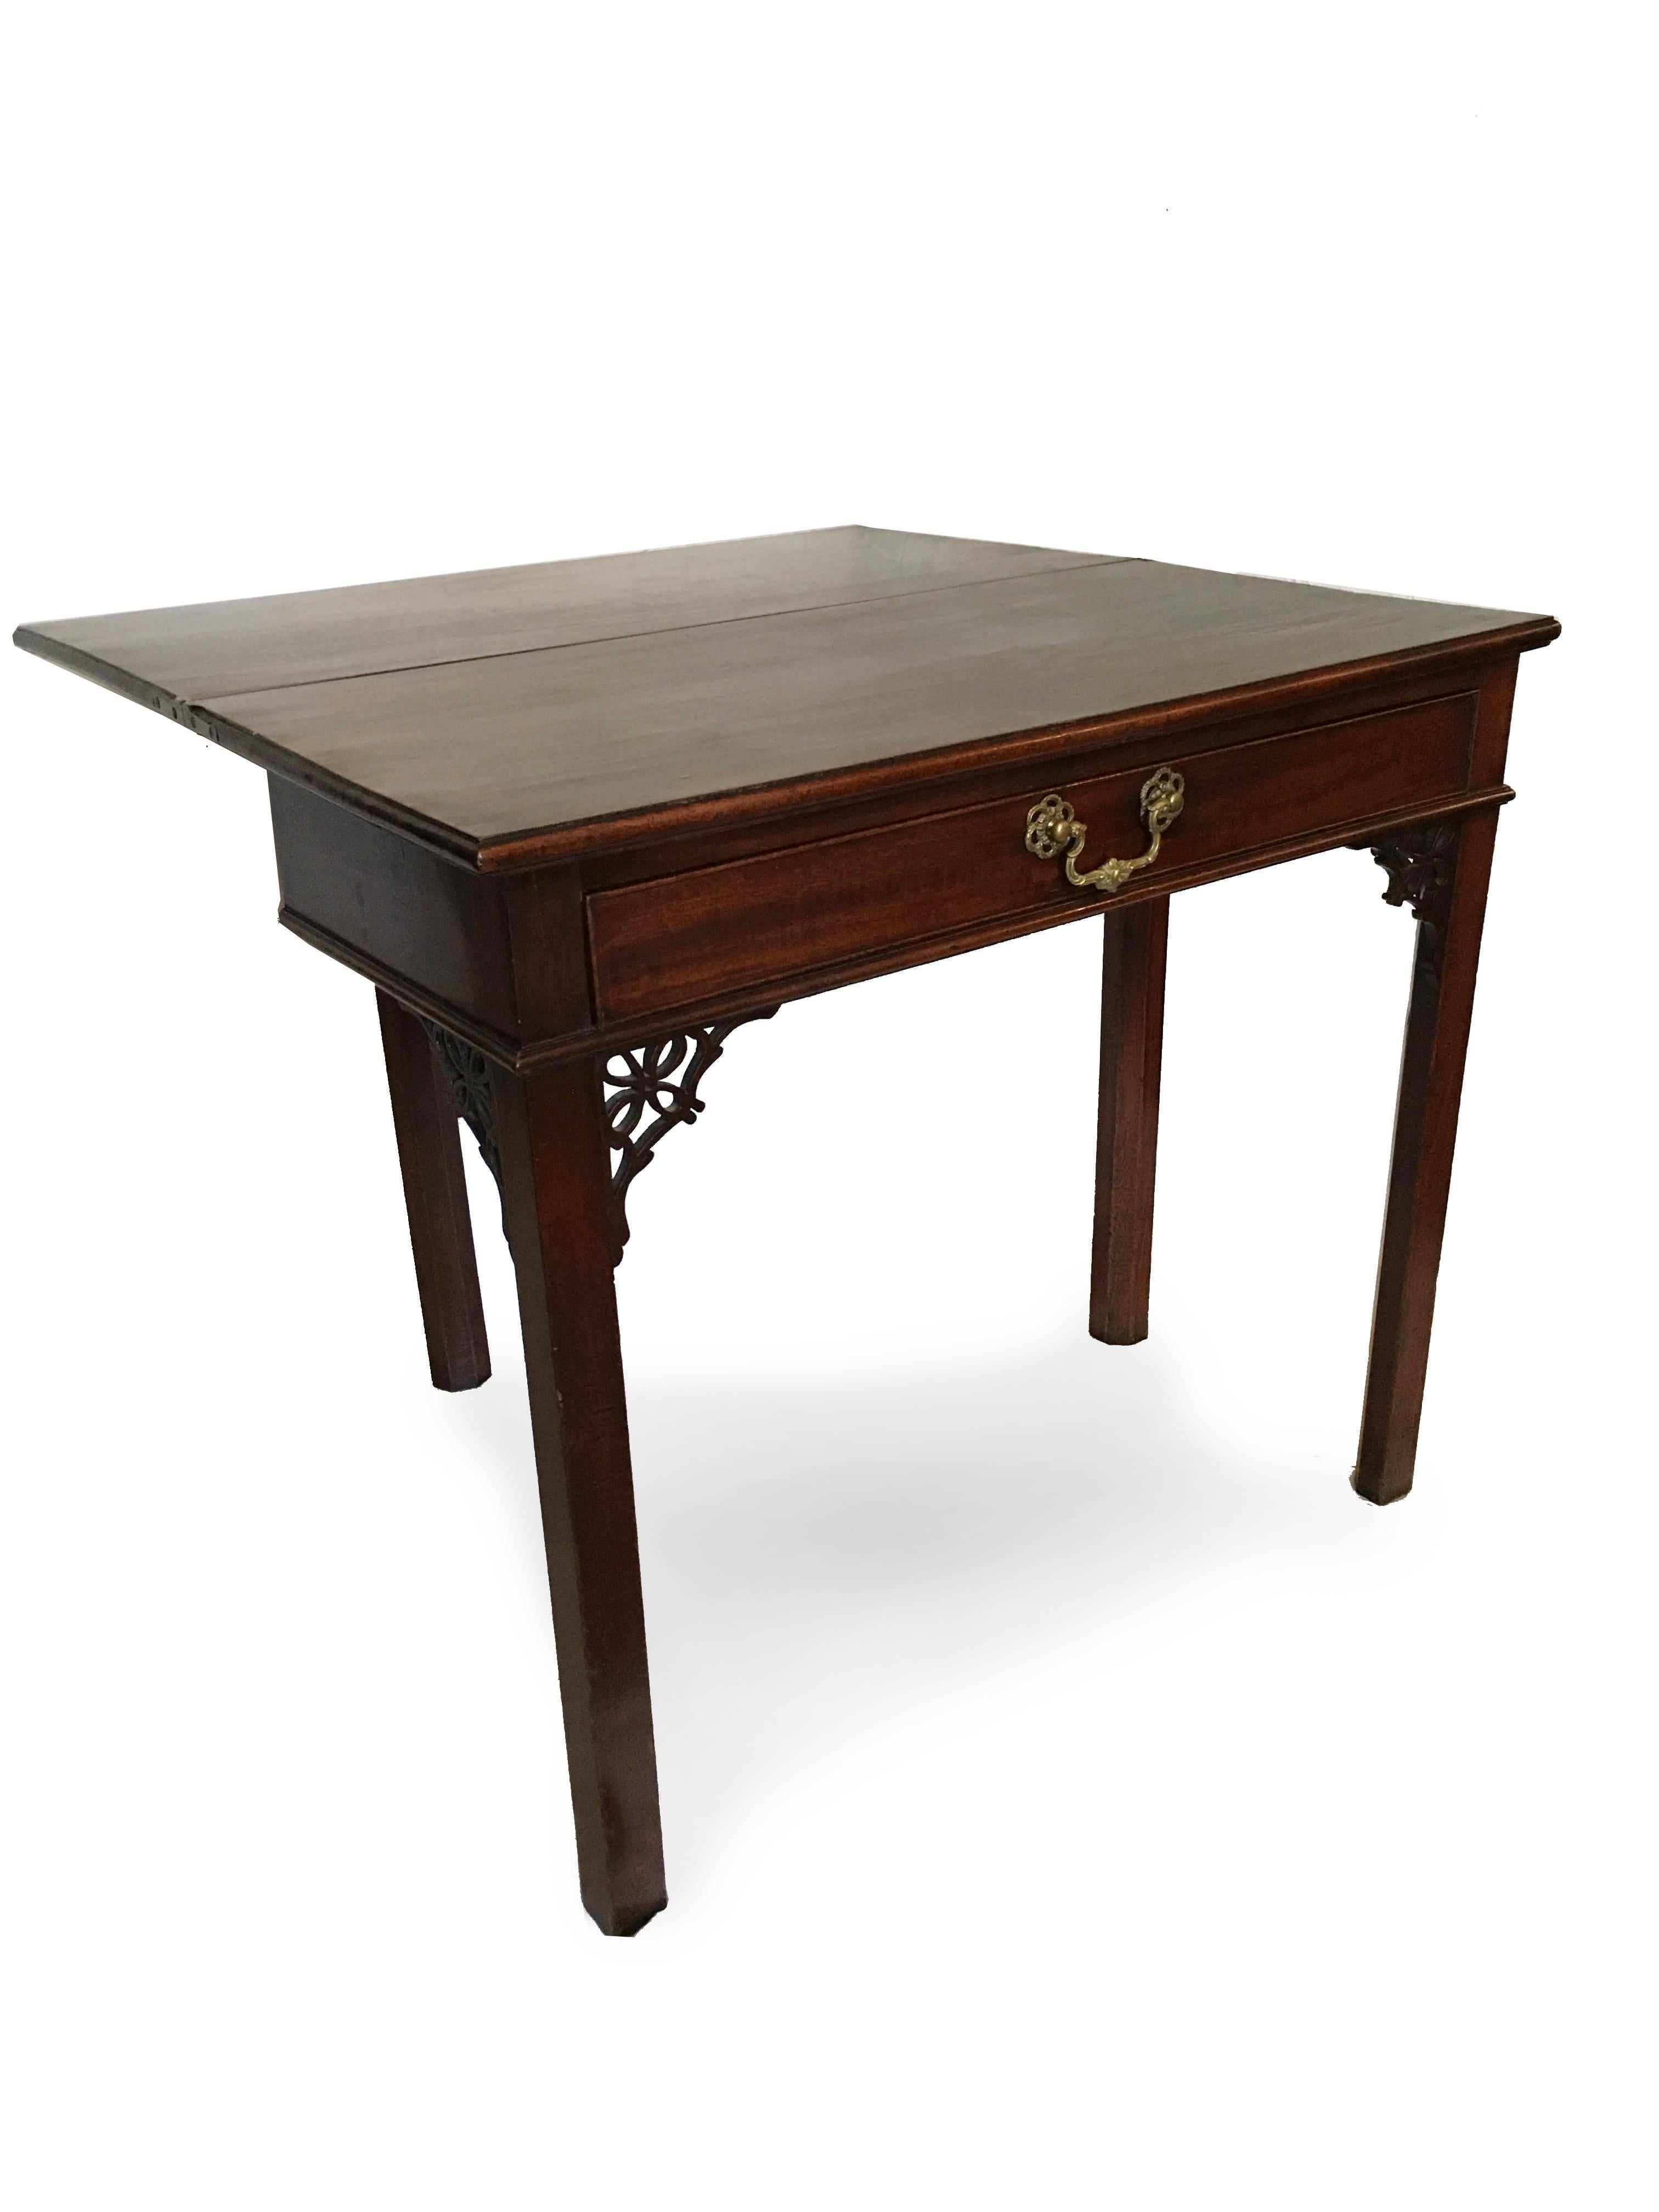 English 18th Century Chippendale Mahogany Card Table